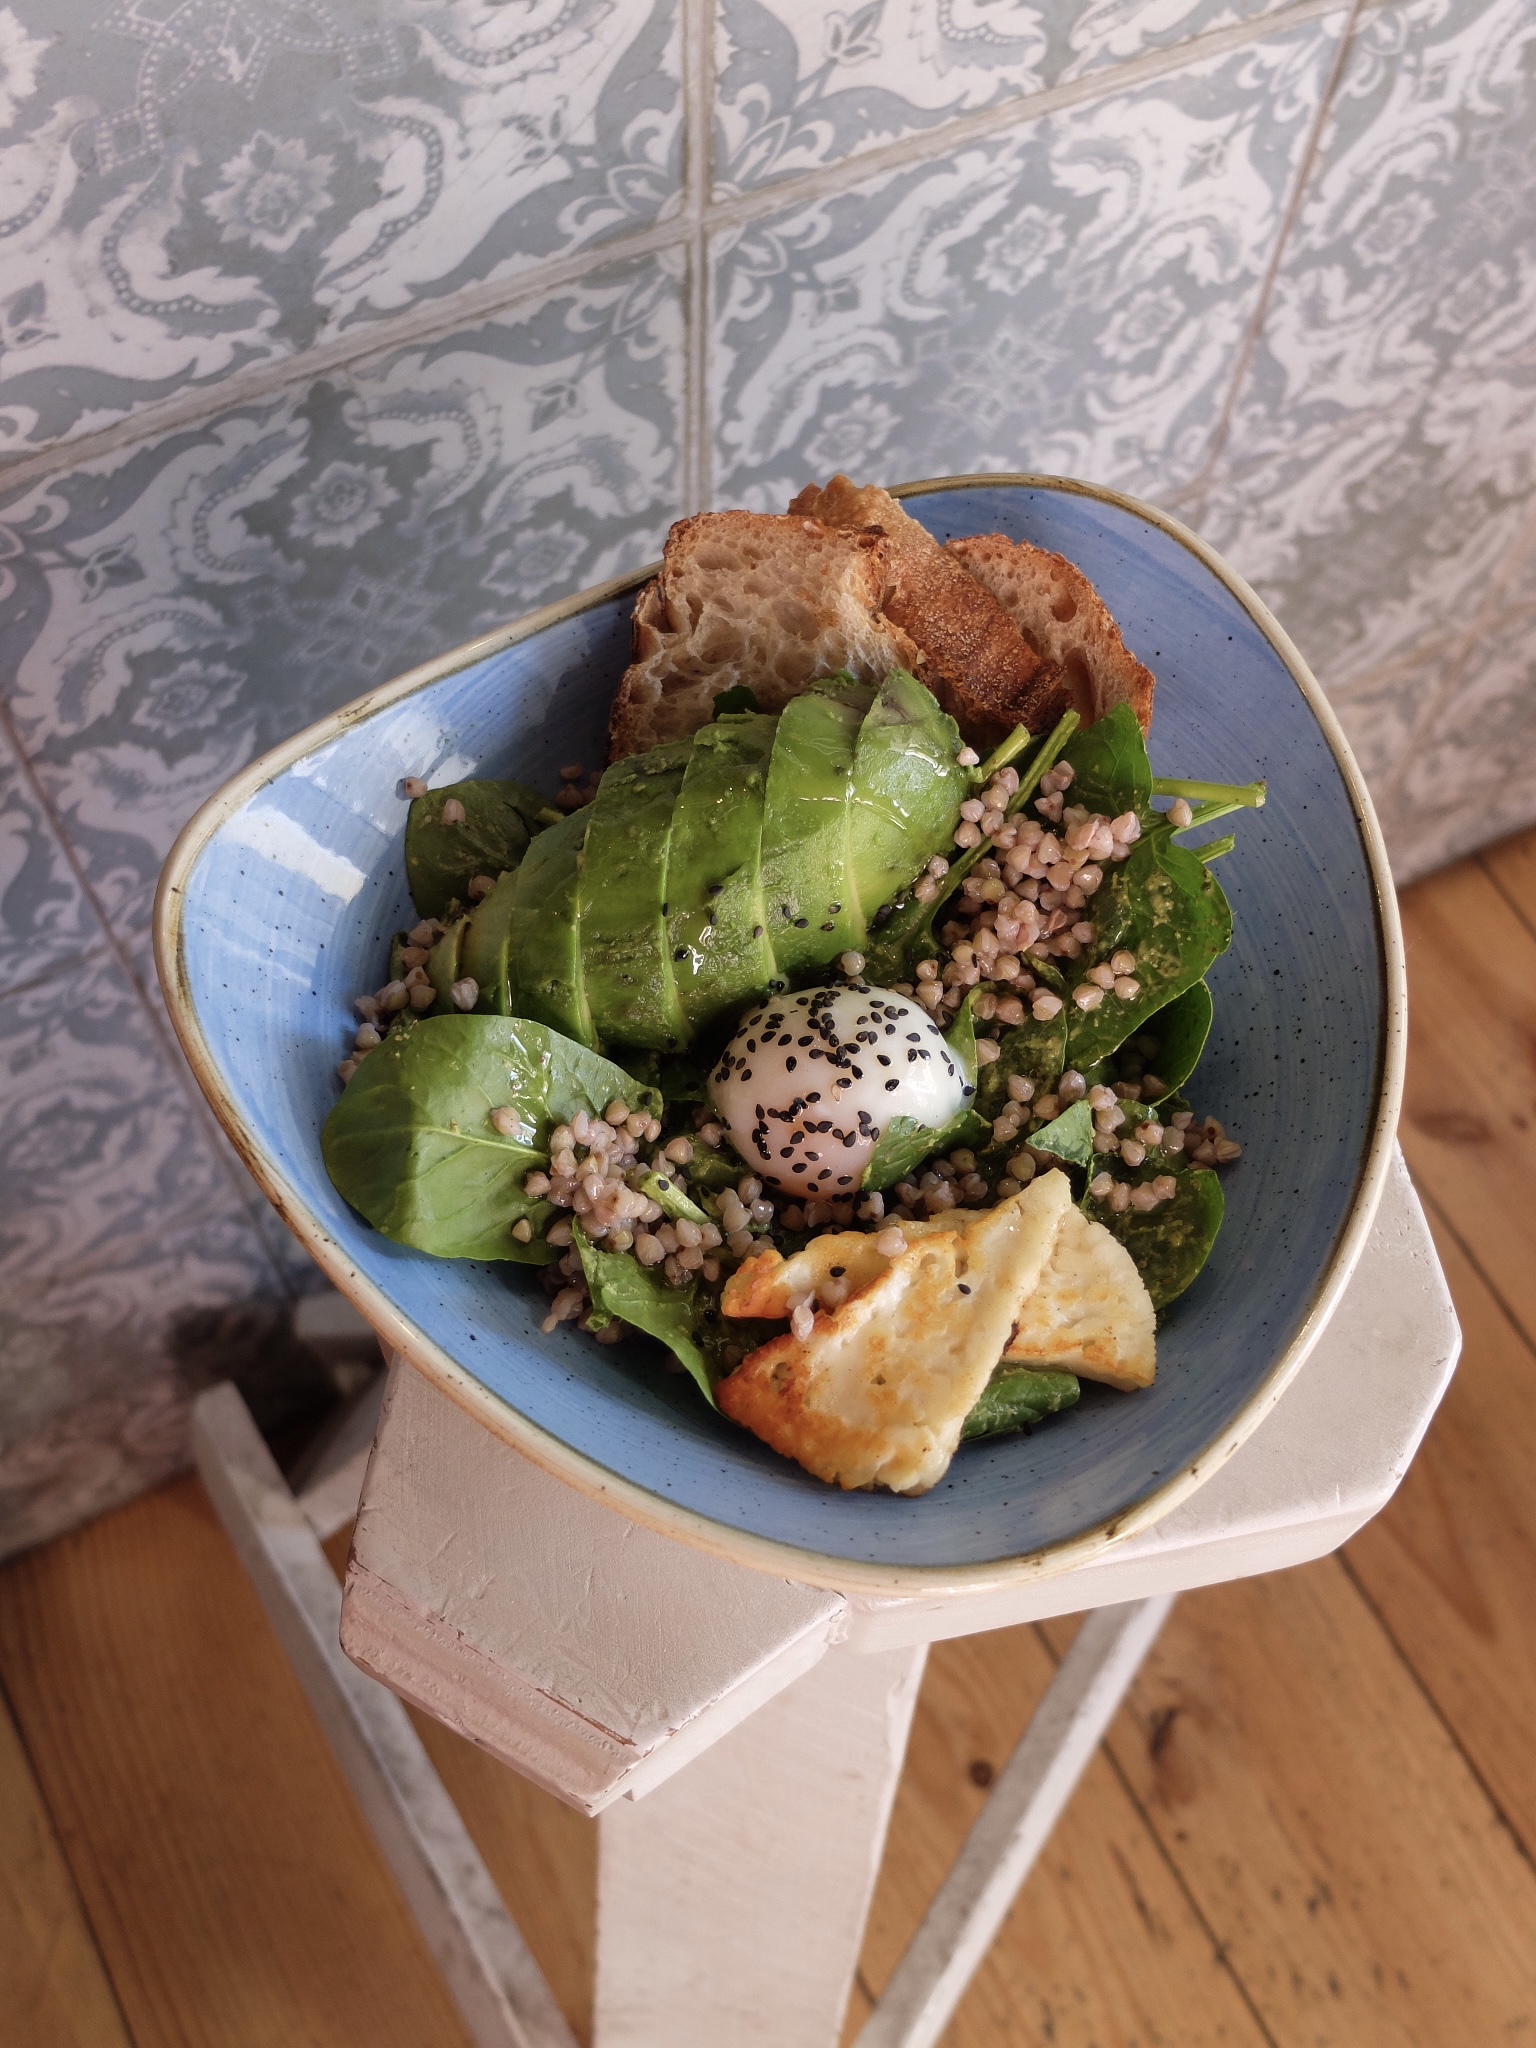 ADDICT BOWL: Mix of buckwheat with spinach, halloumi cheese, avocado, a poached egg and yogurt sauce.